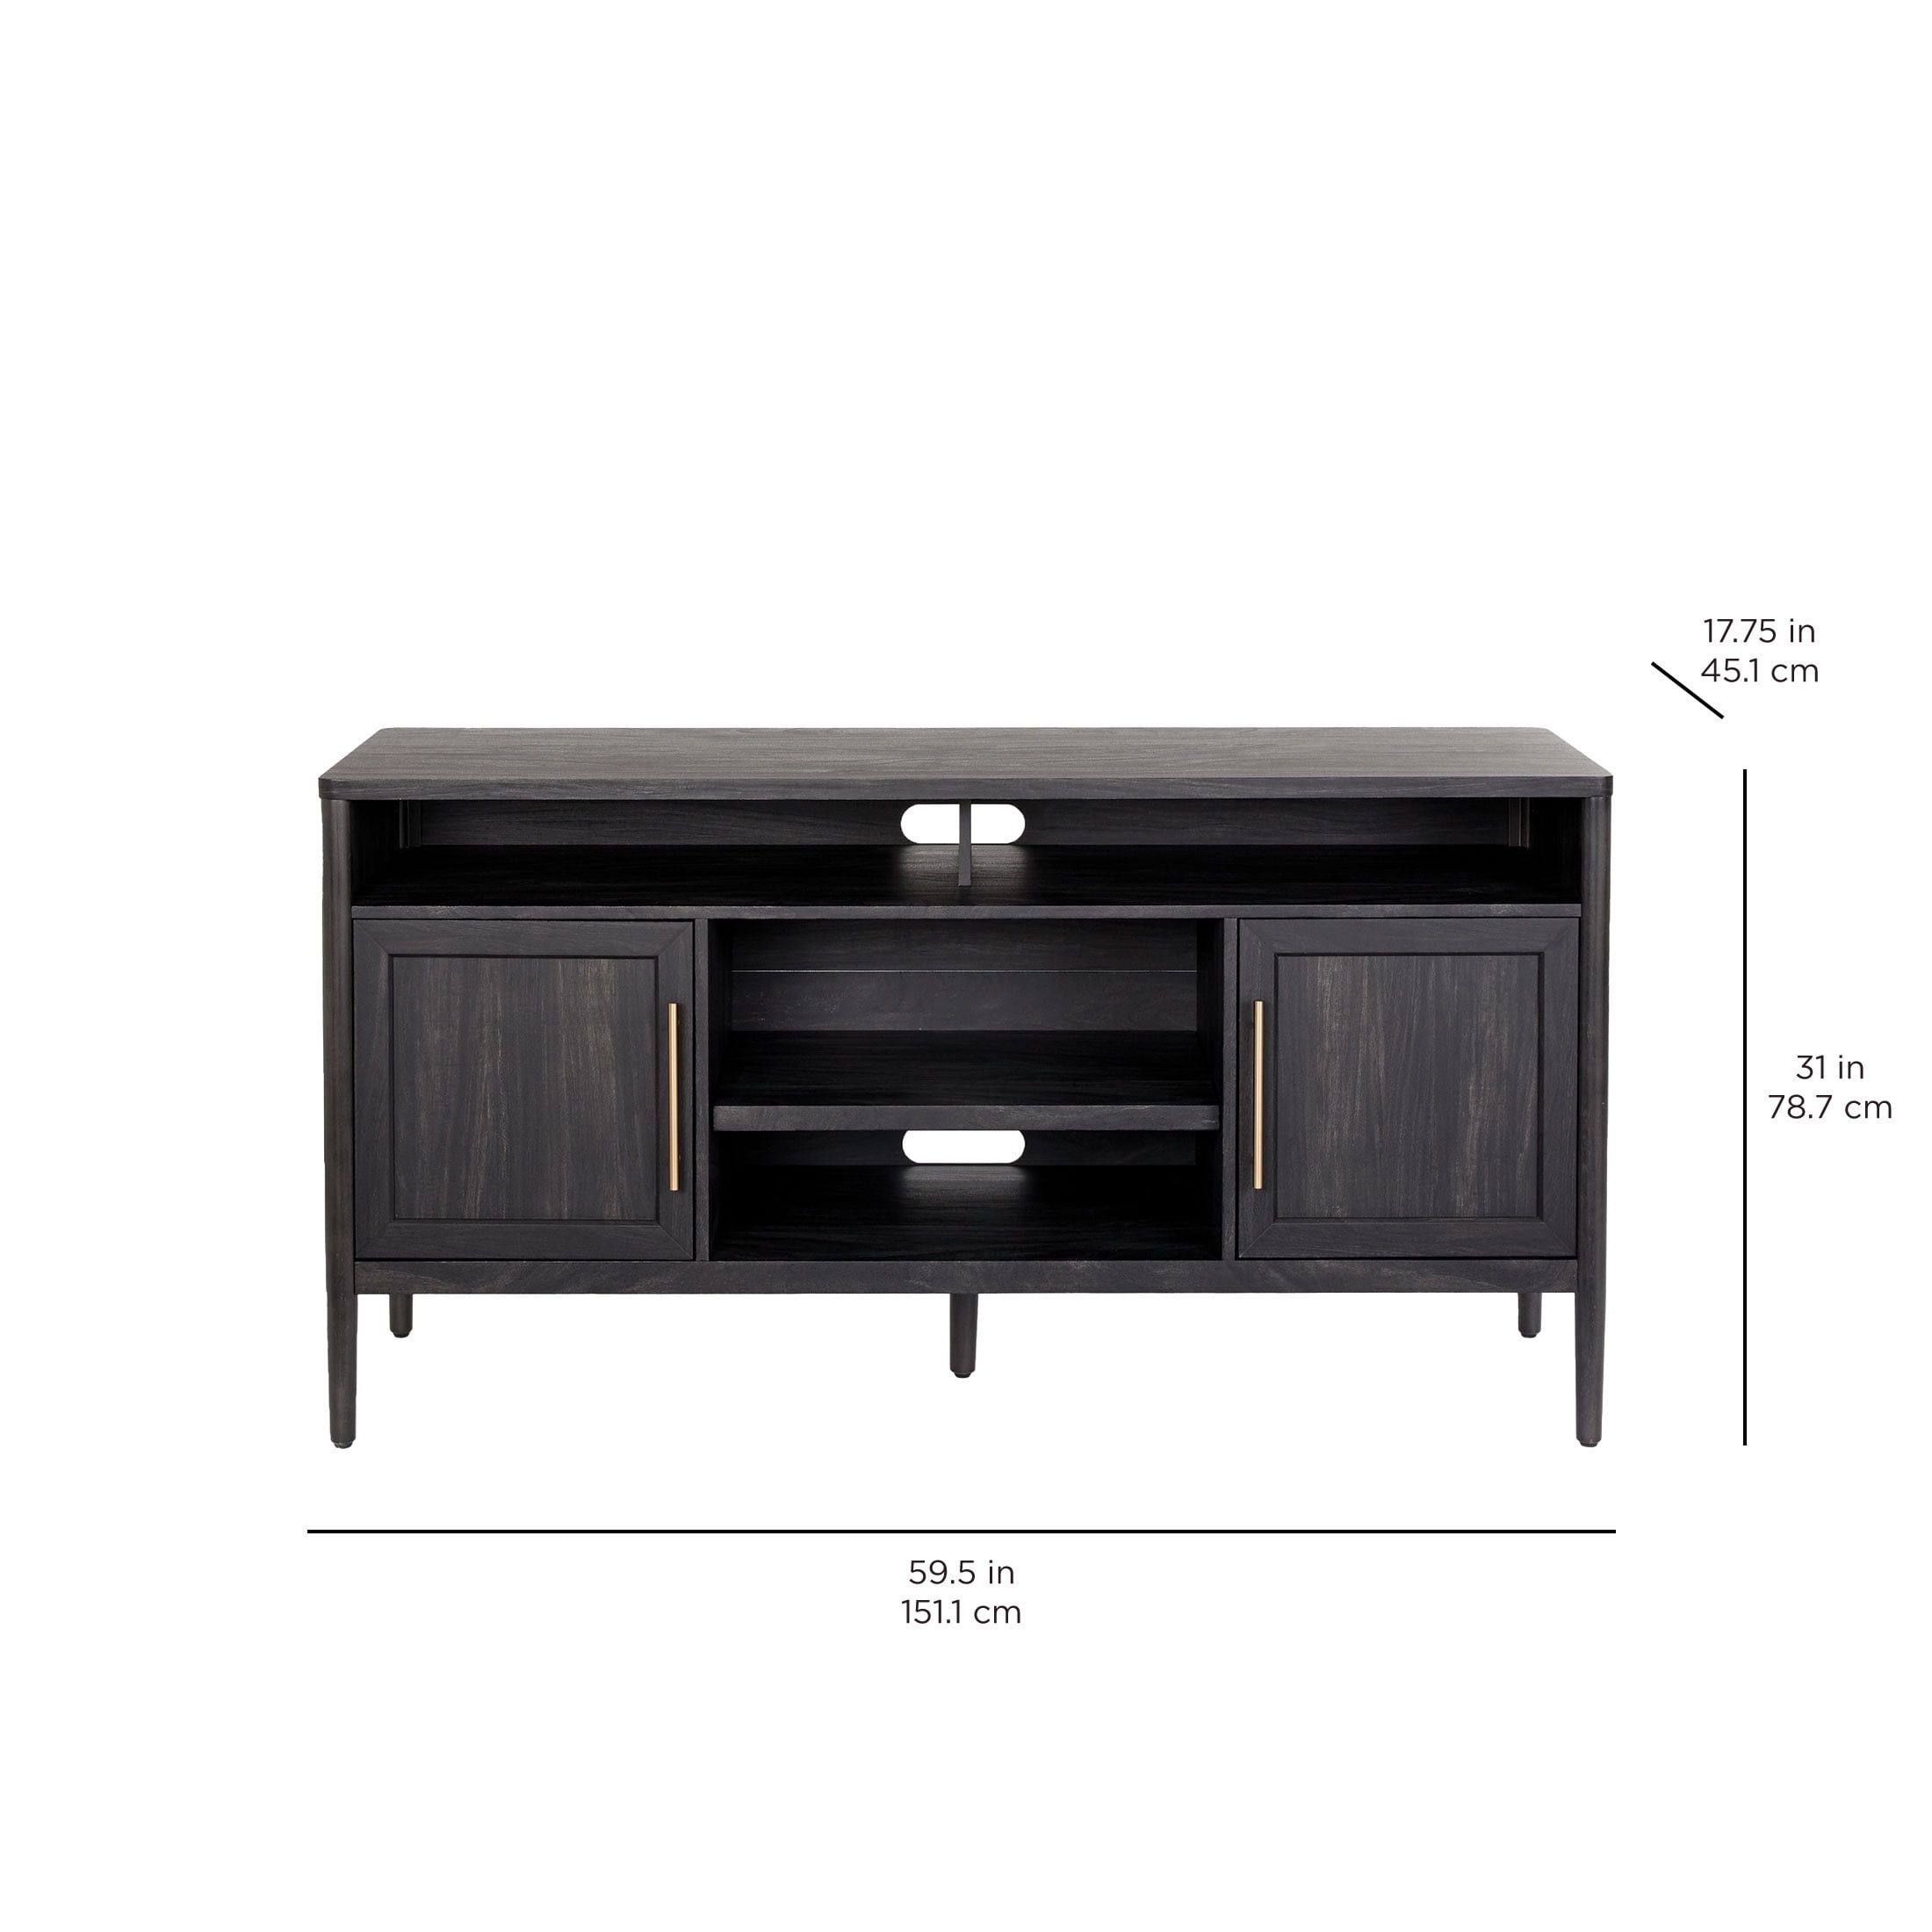 Better Homes & Gardens Oaklee Tv Stand For Tvs Up To 70”, Charcoal Throughout Oaklee Tv Stands (View 18 of 20)